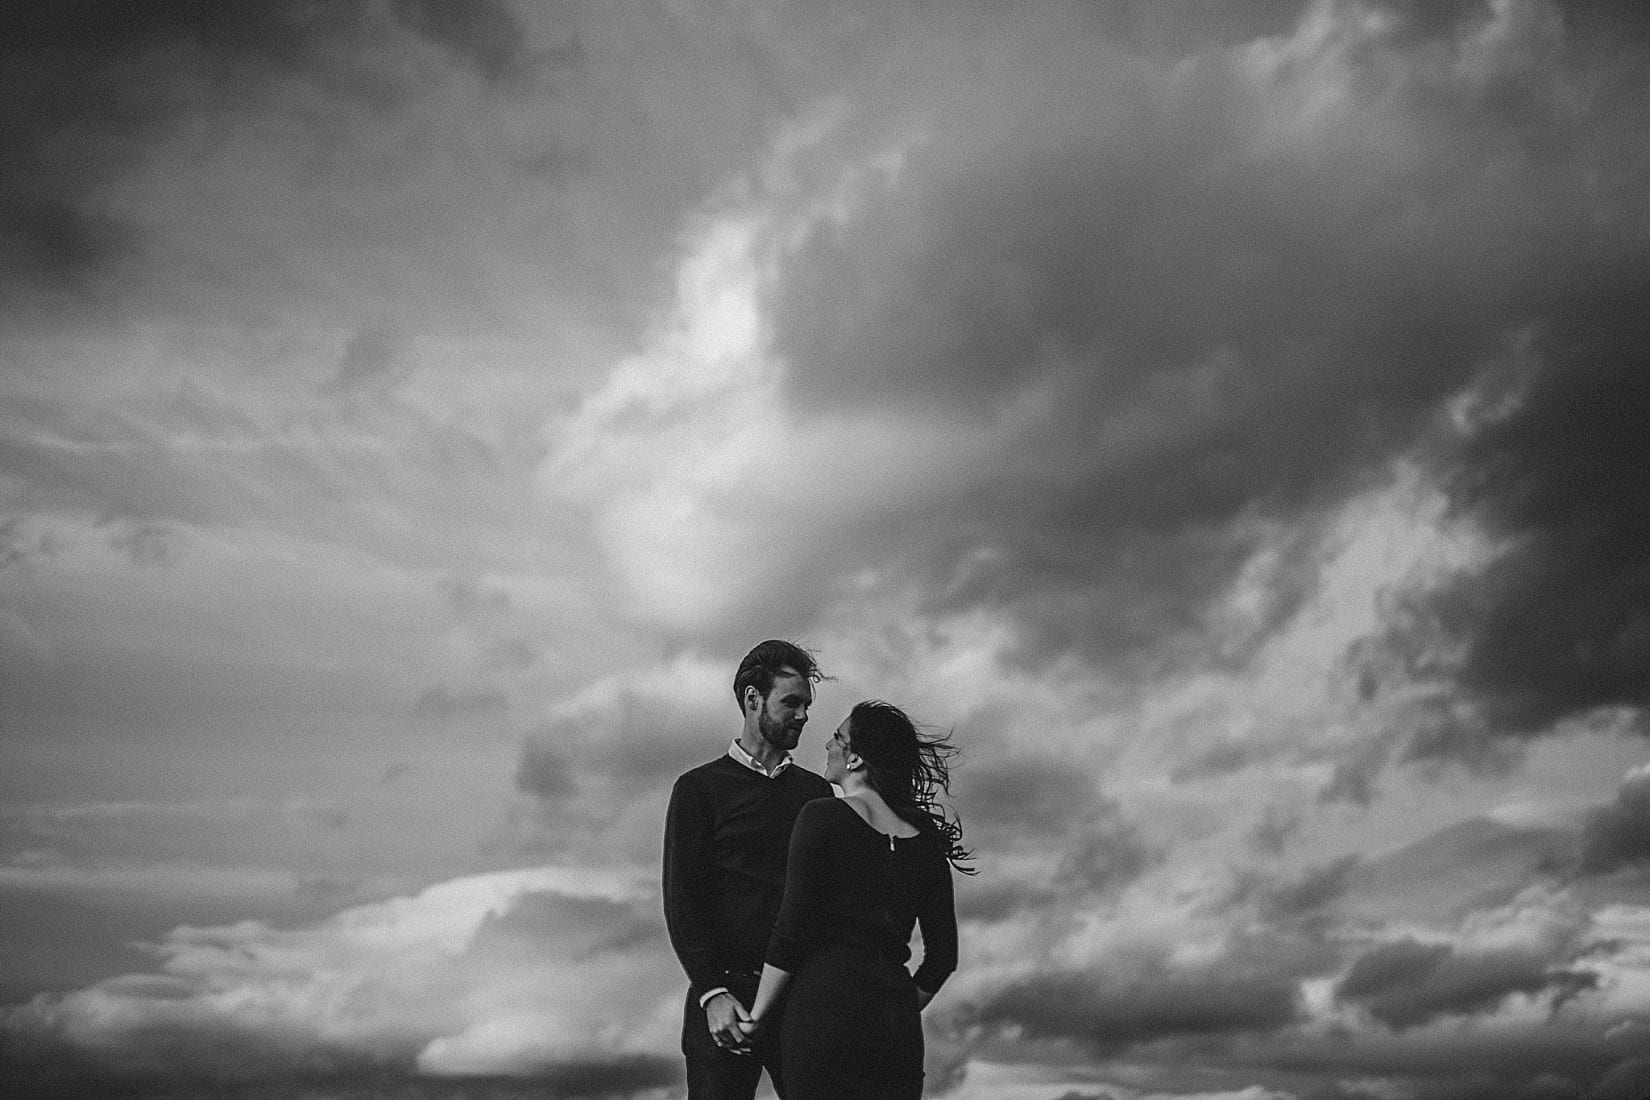 Looking for Kelowna's Best Wedding Photographer? Barnett Photography are married couple photographing weddings here in the beautiful Okanagan! Winners of the Kelowna Now Best of Kelowna two years in a row!